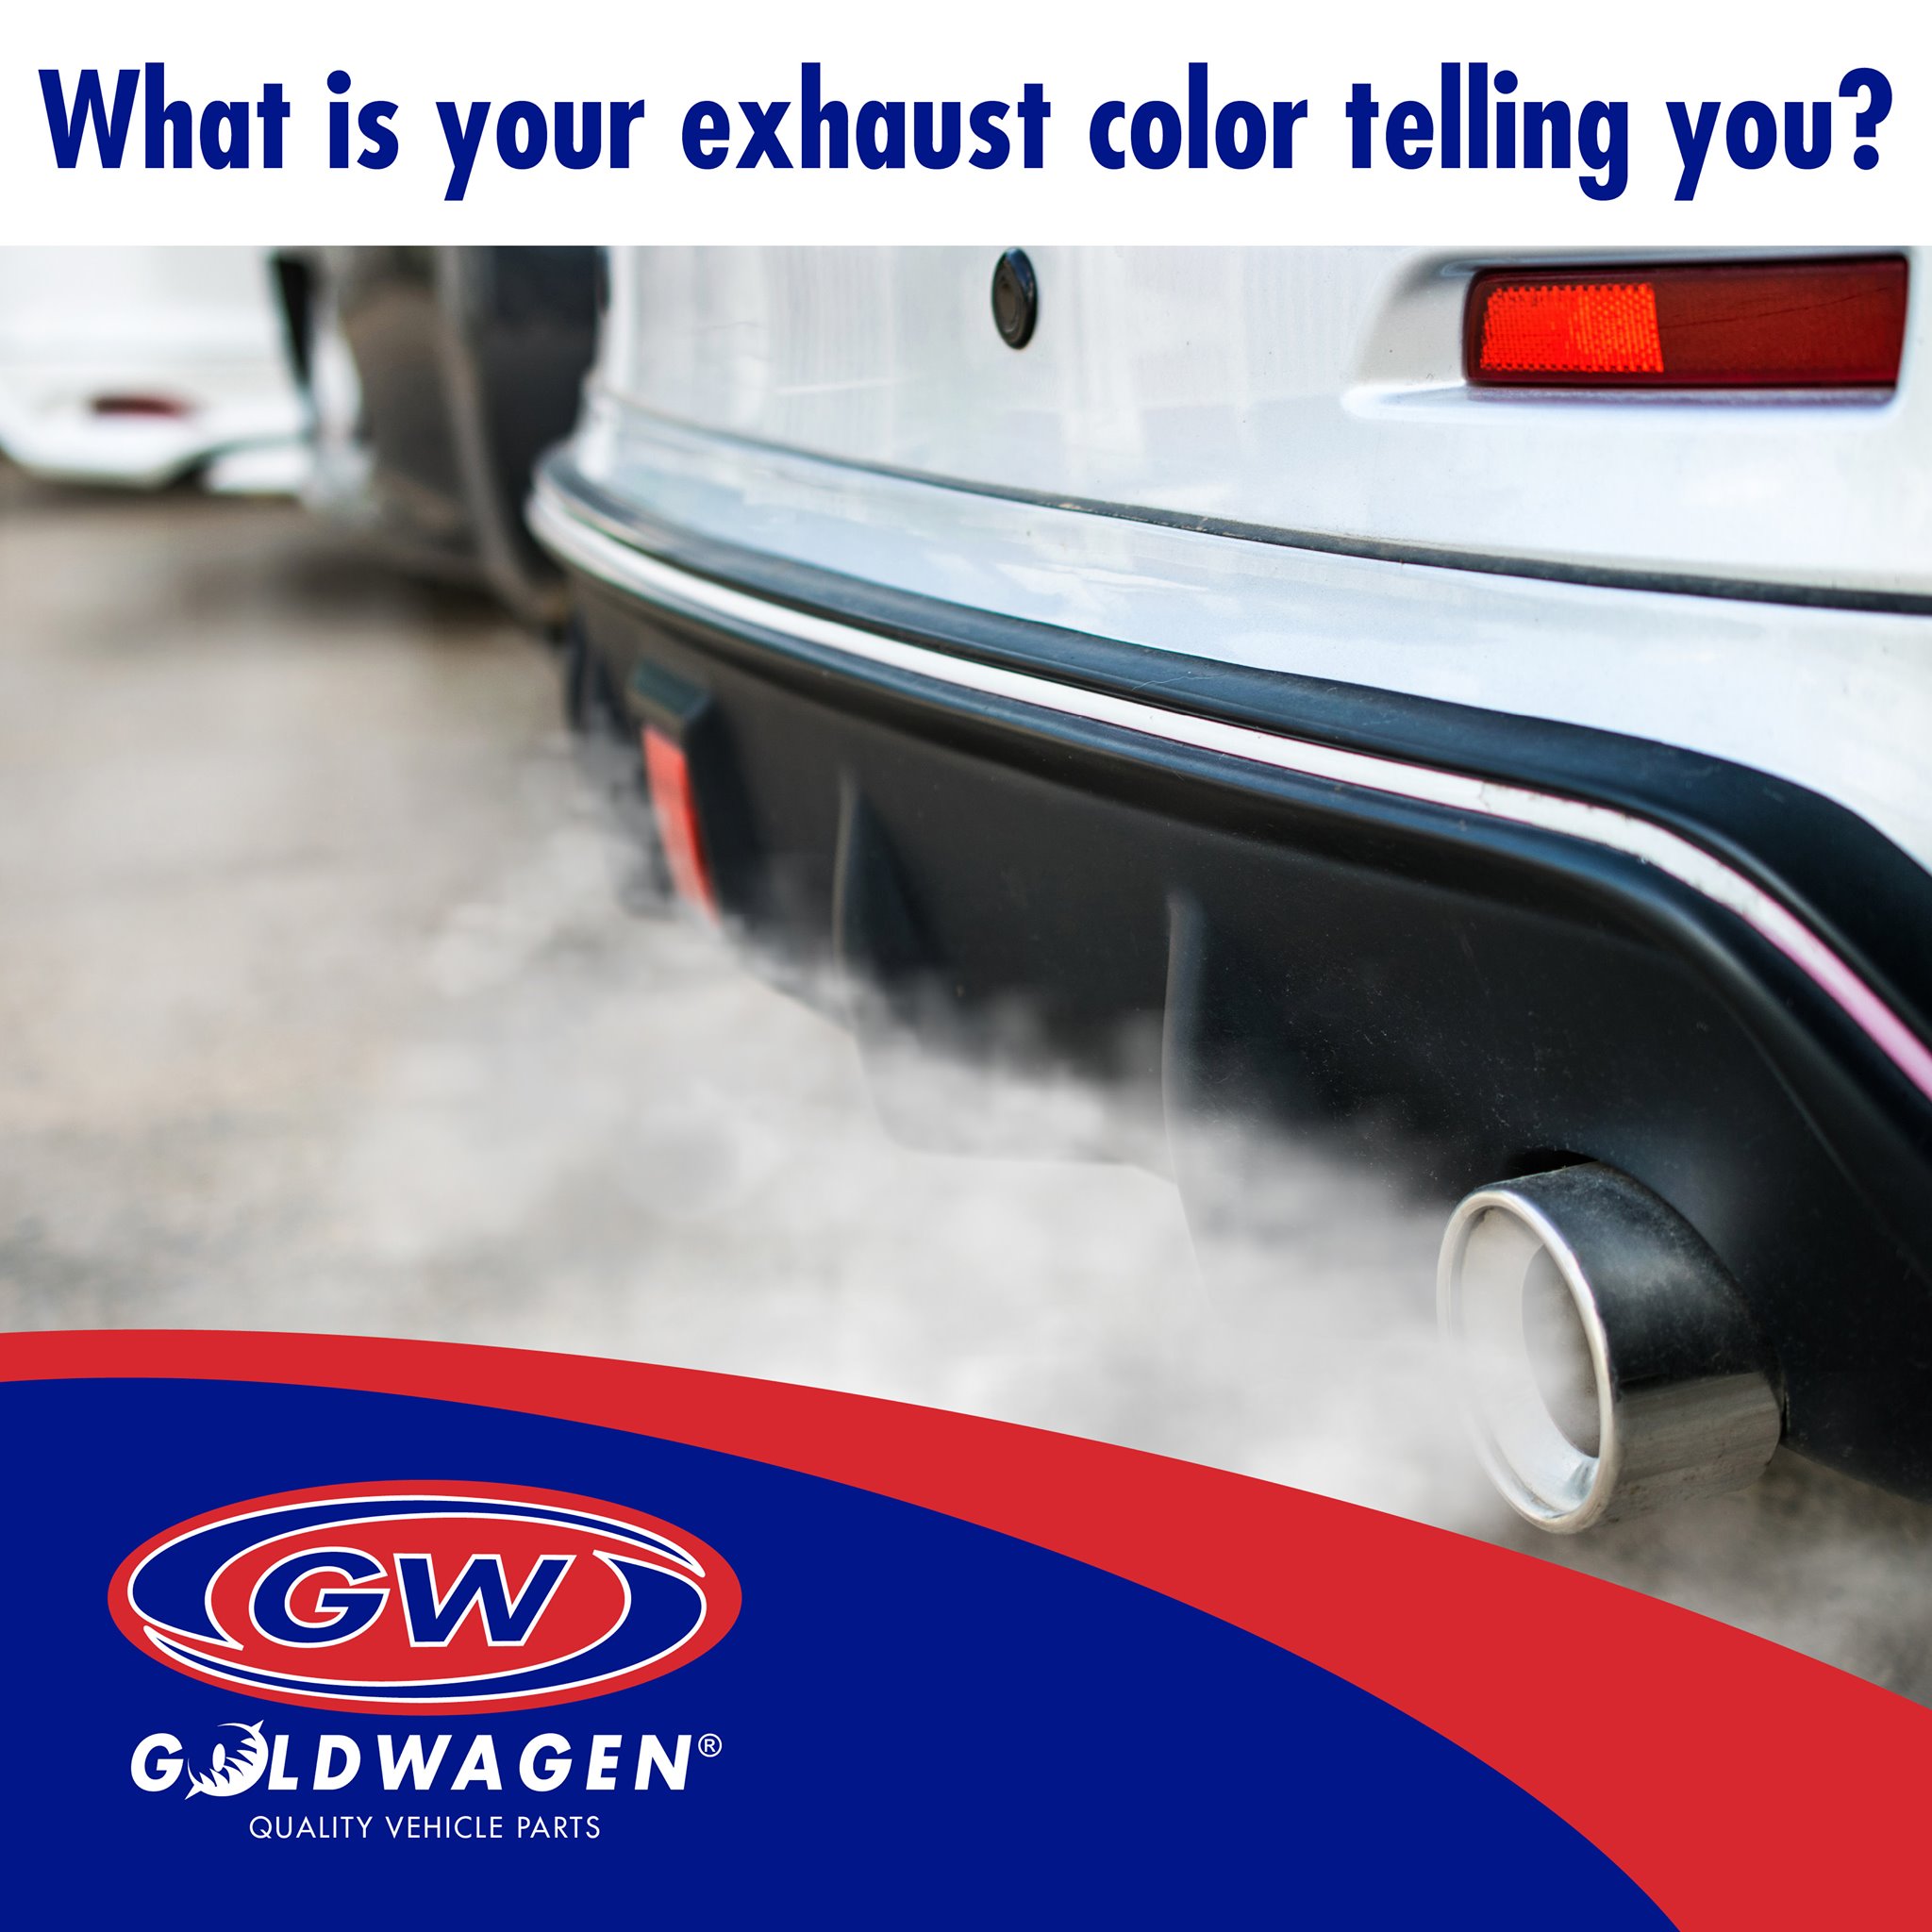 What is the color of the smoke from your exhaust telling you?